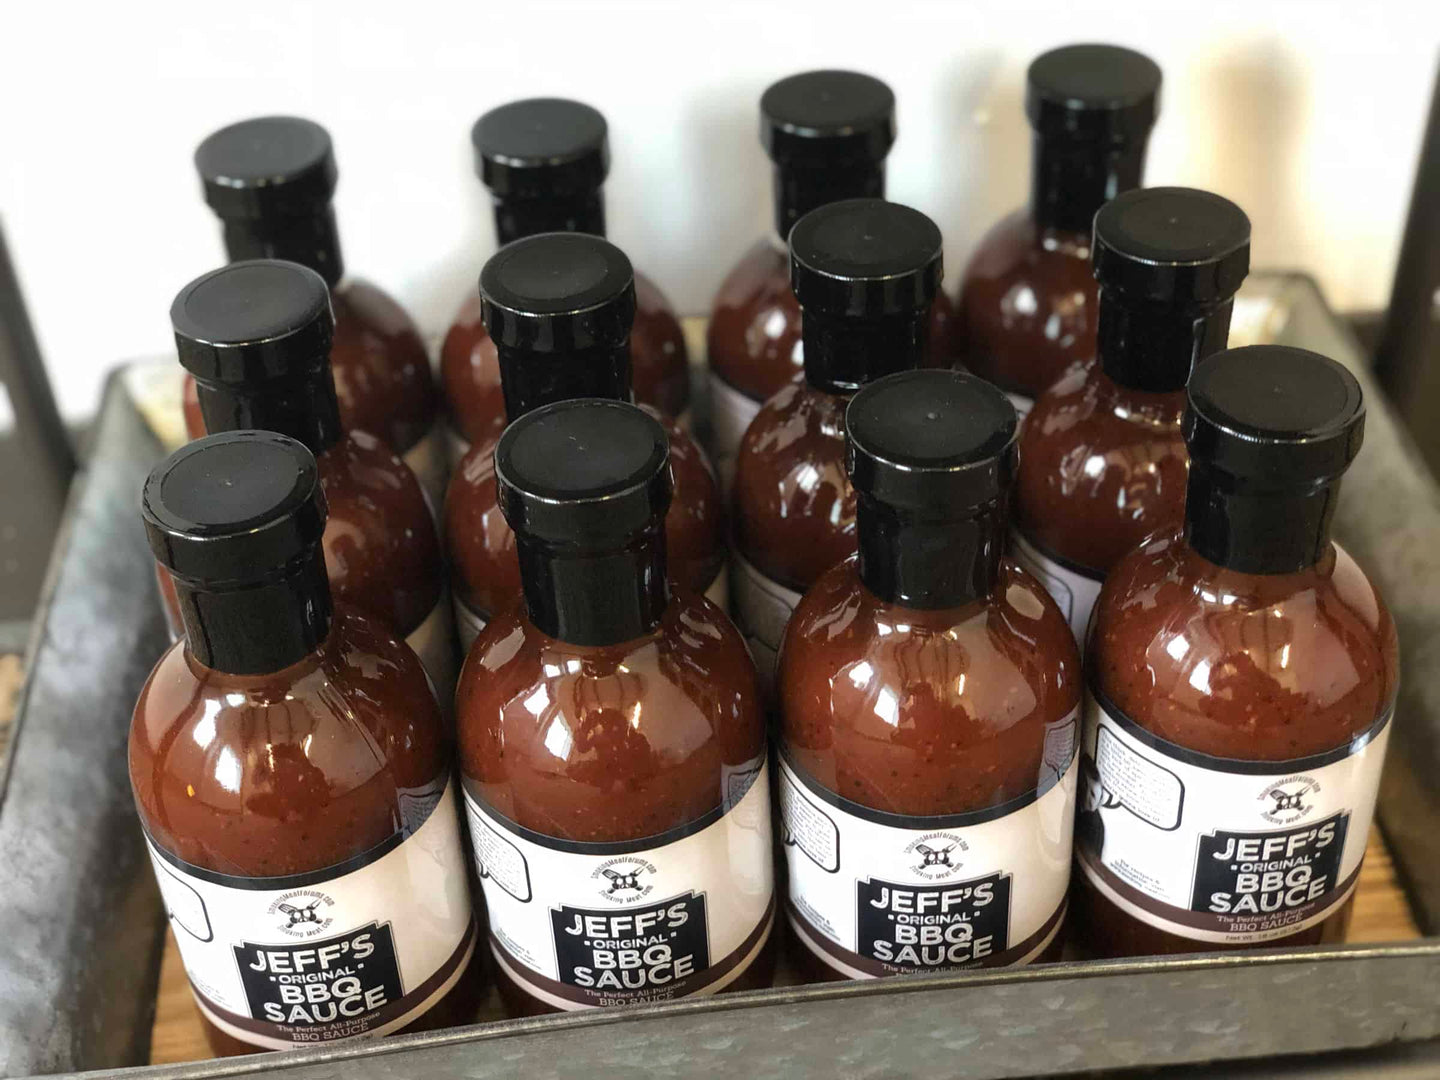 Jeff's Barbecue Sauce In a Bottle! - Learn to Smoke Meat with Jeff Phillips